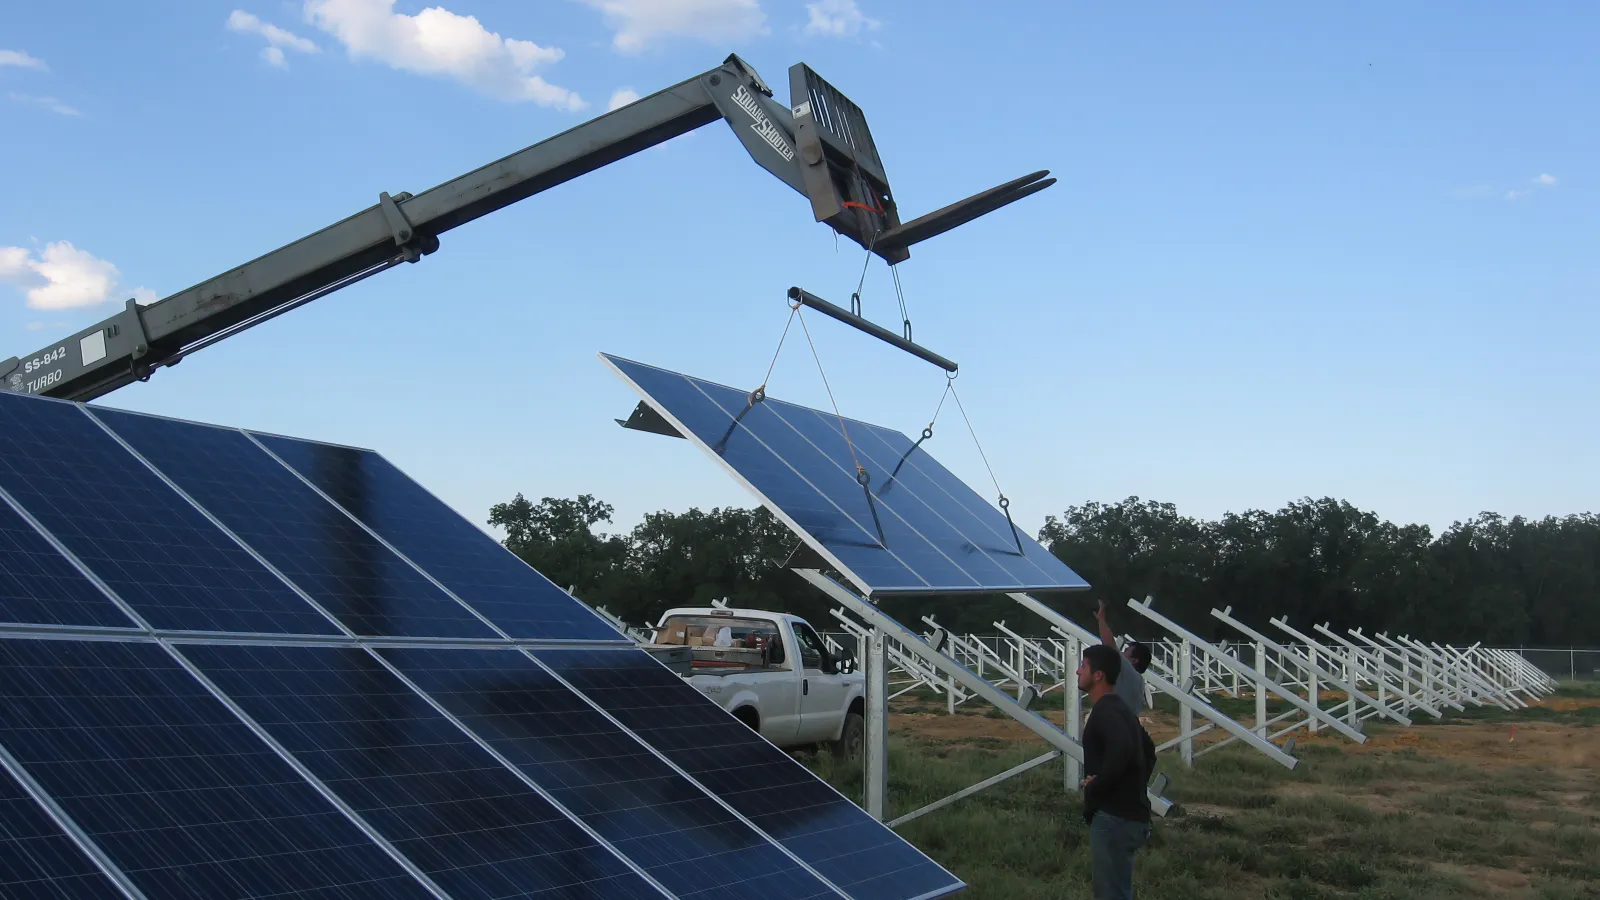 Installing solar panels on helical ground supports